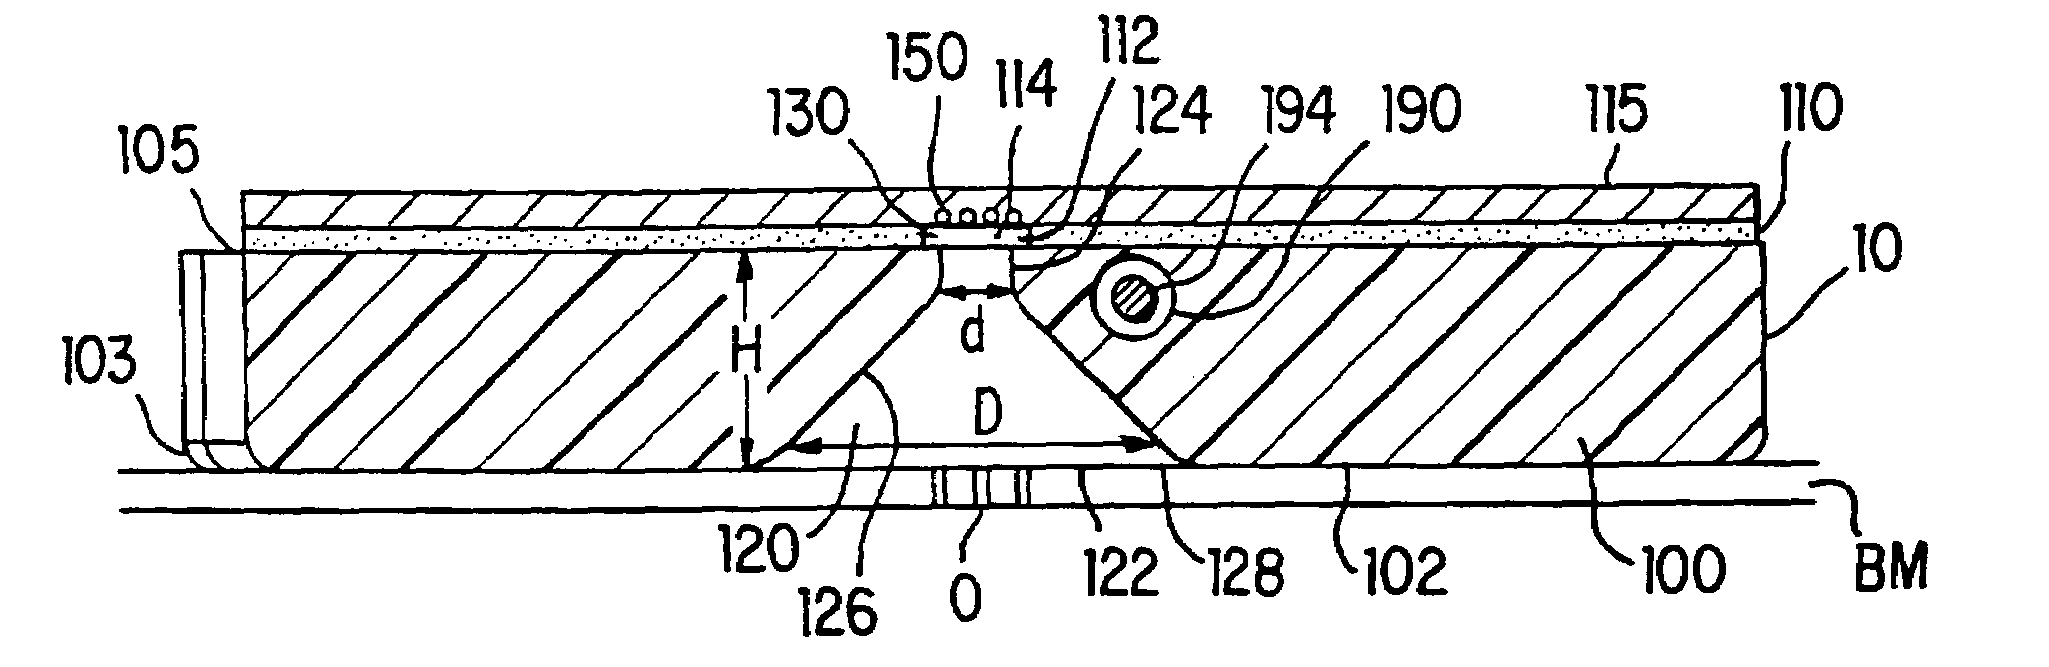 Tissue interface device